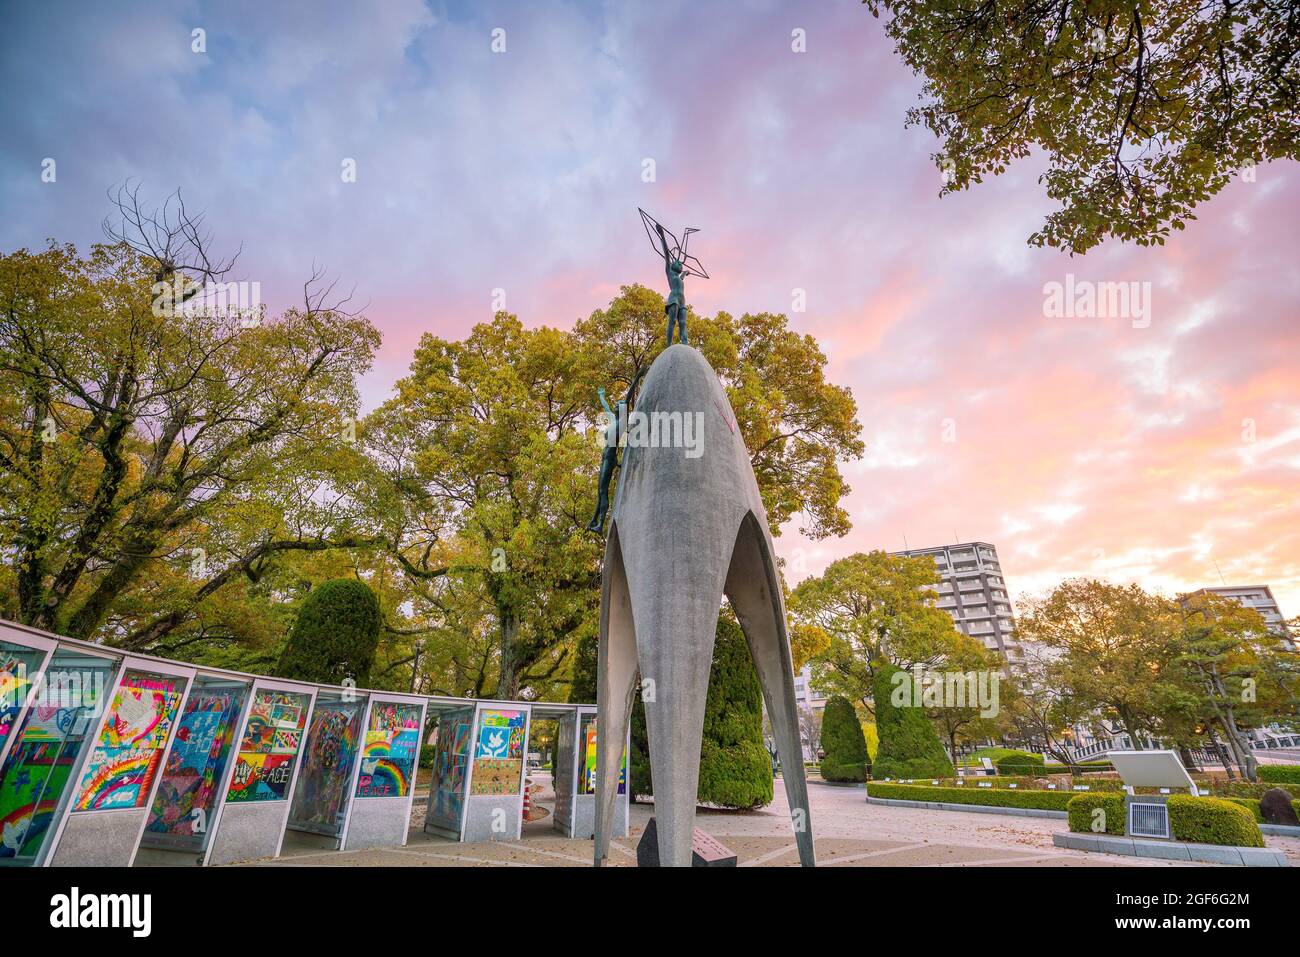 HIROSHIMA, JAPAN - MARCH 24, 2019: The Children's Peace Monument with a statue of a girl holding a folded paper crane, in Hiroshima Peace Memorial Par Stock Photo